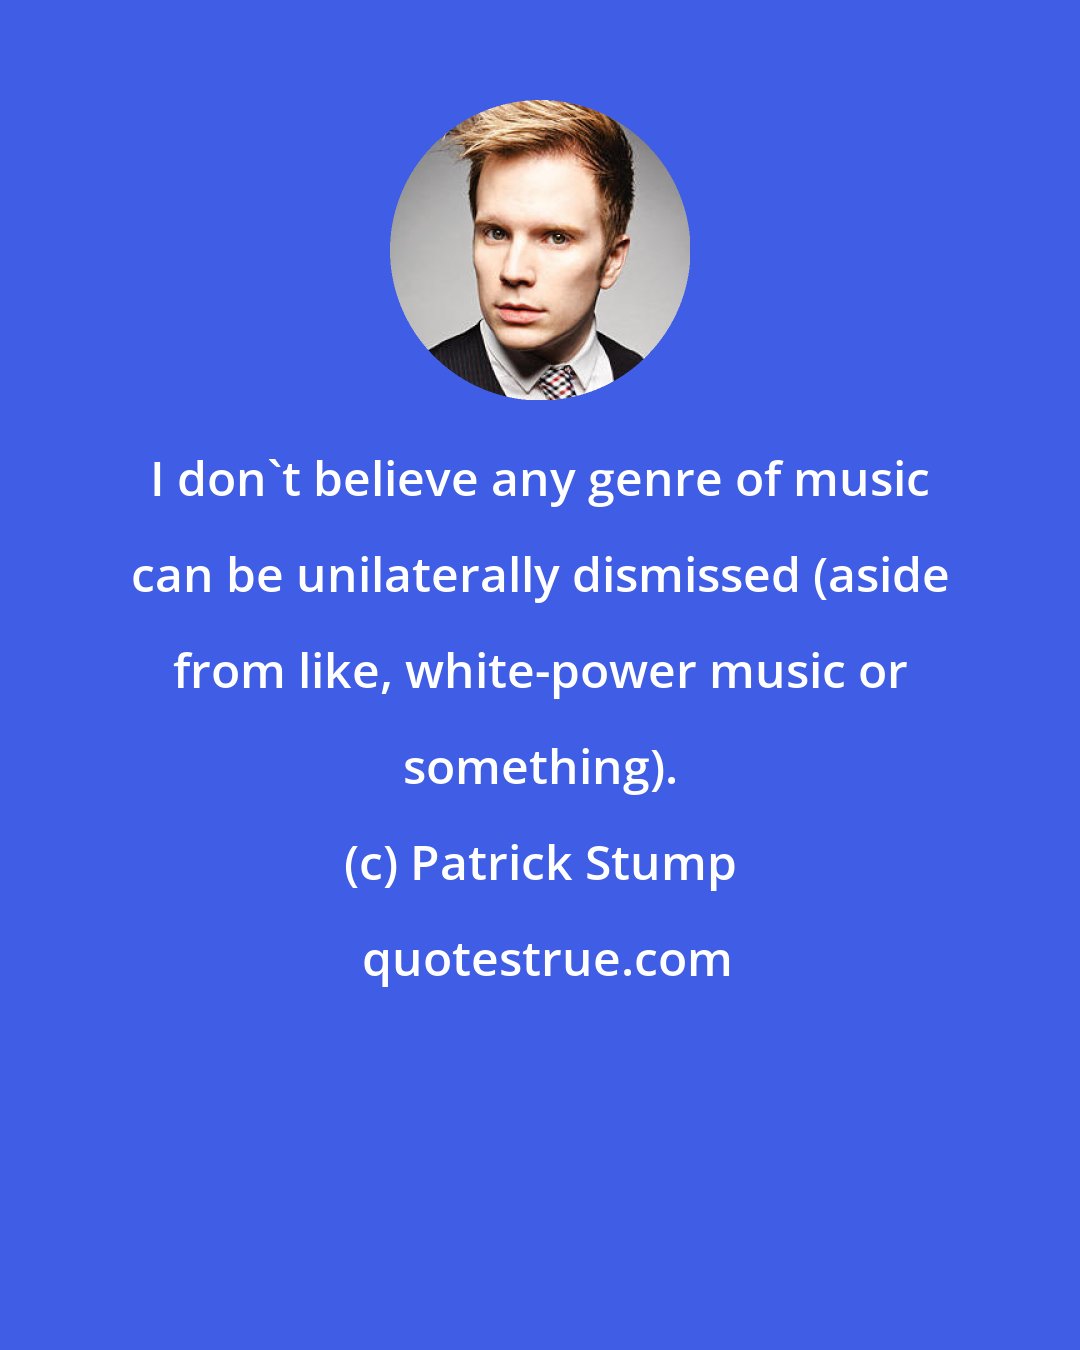 Patrick Stump: I don't believe any genre of music can be unilaterally dismissed (aside from like, white-power music or something).